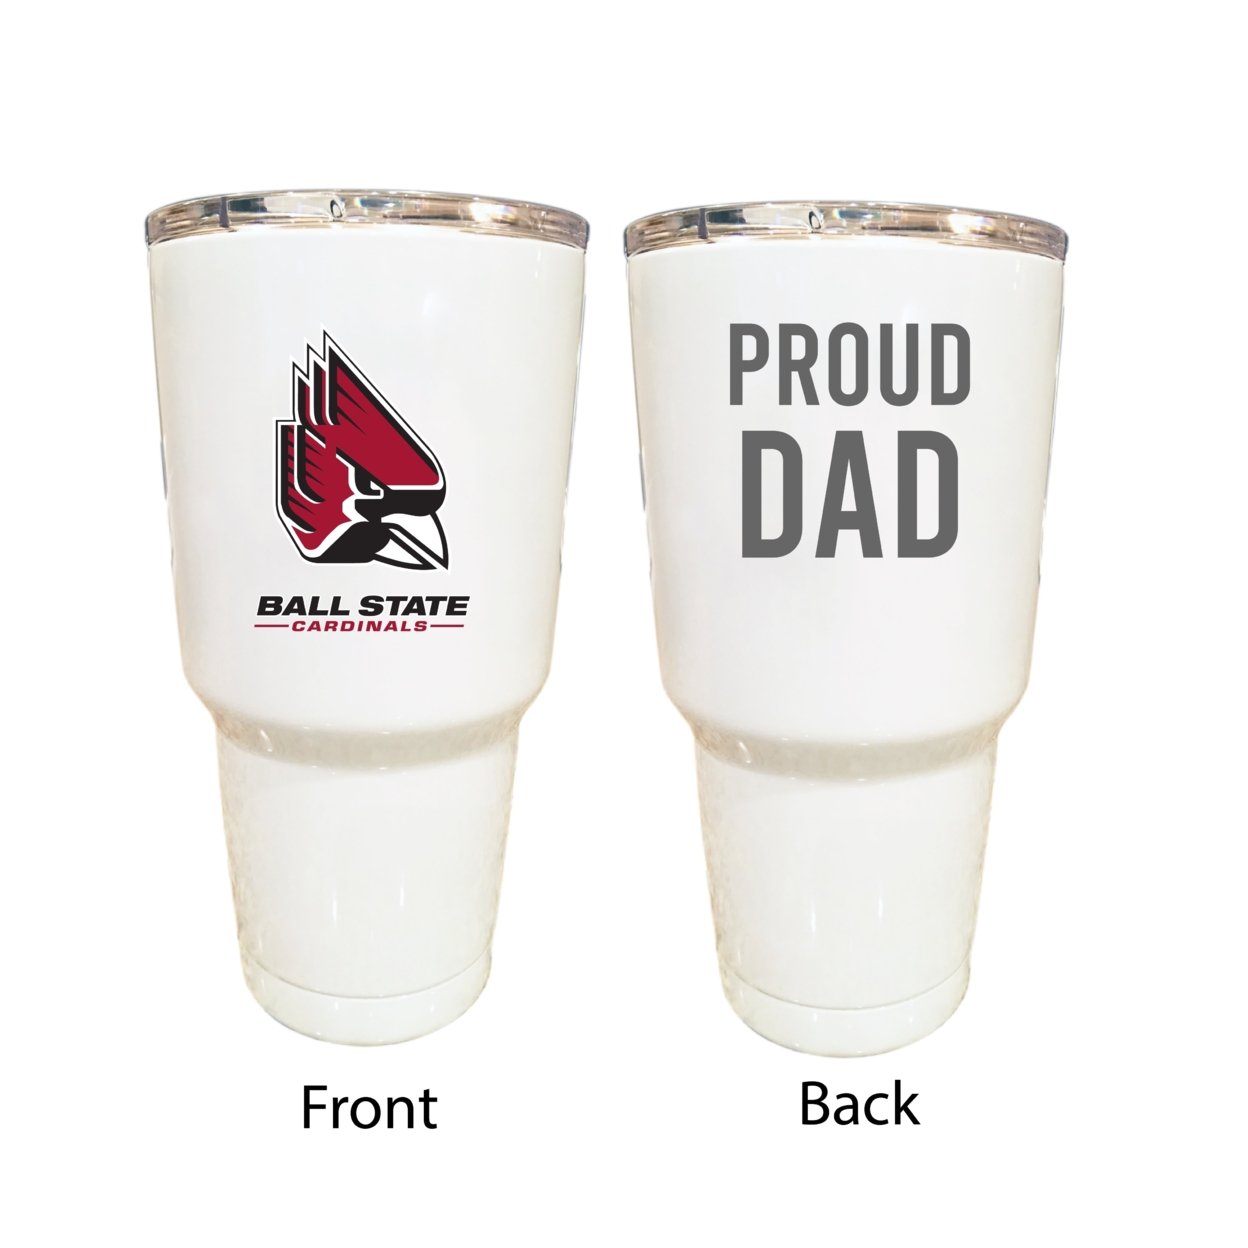 Ball State University Proud Dad 24 Oz Insulated Stainless Steel Tumblers Choose Your Color.